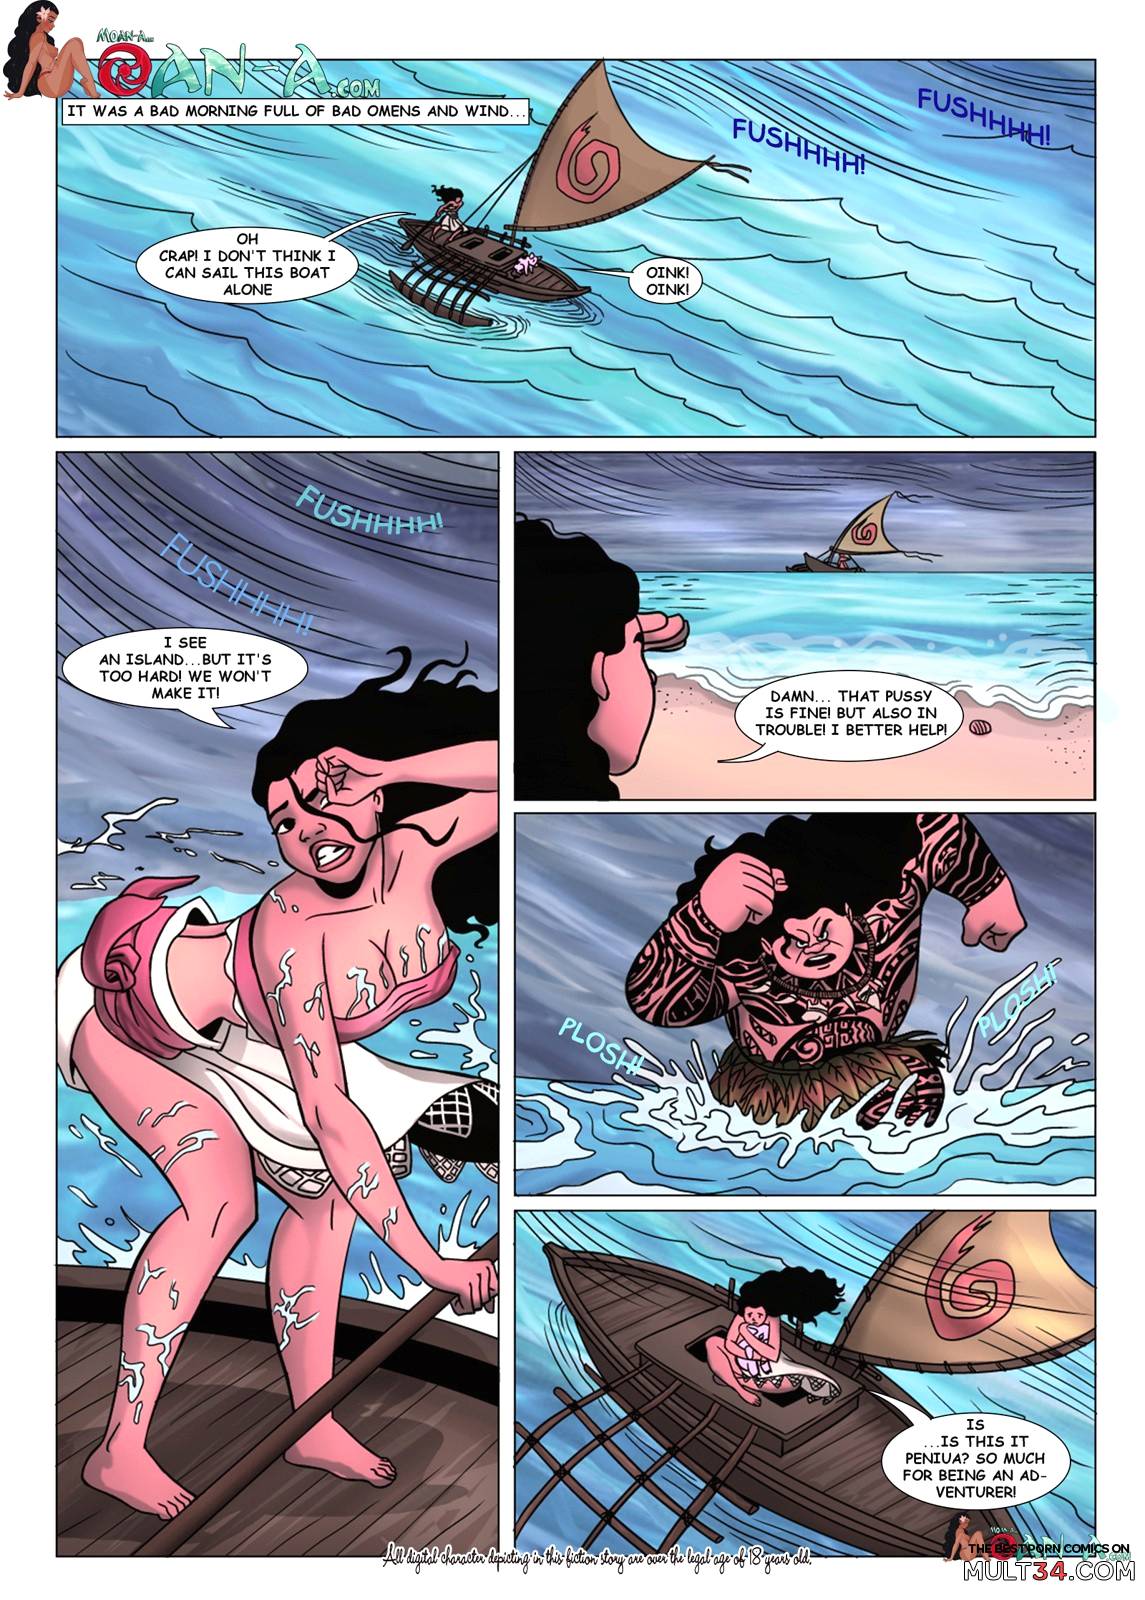 Porn comics with moana, the best collection of porn comics